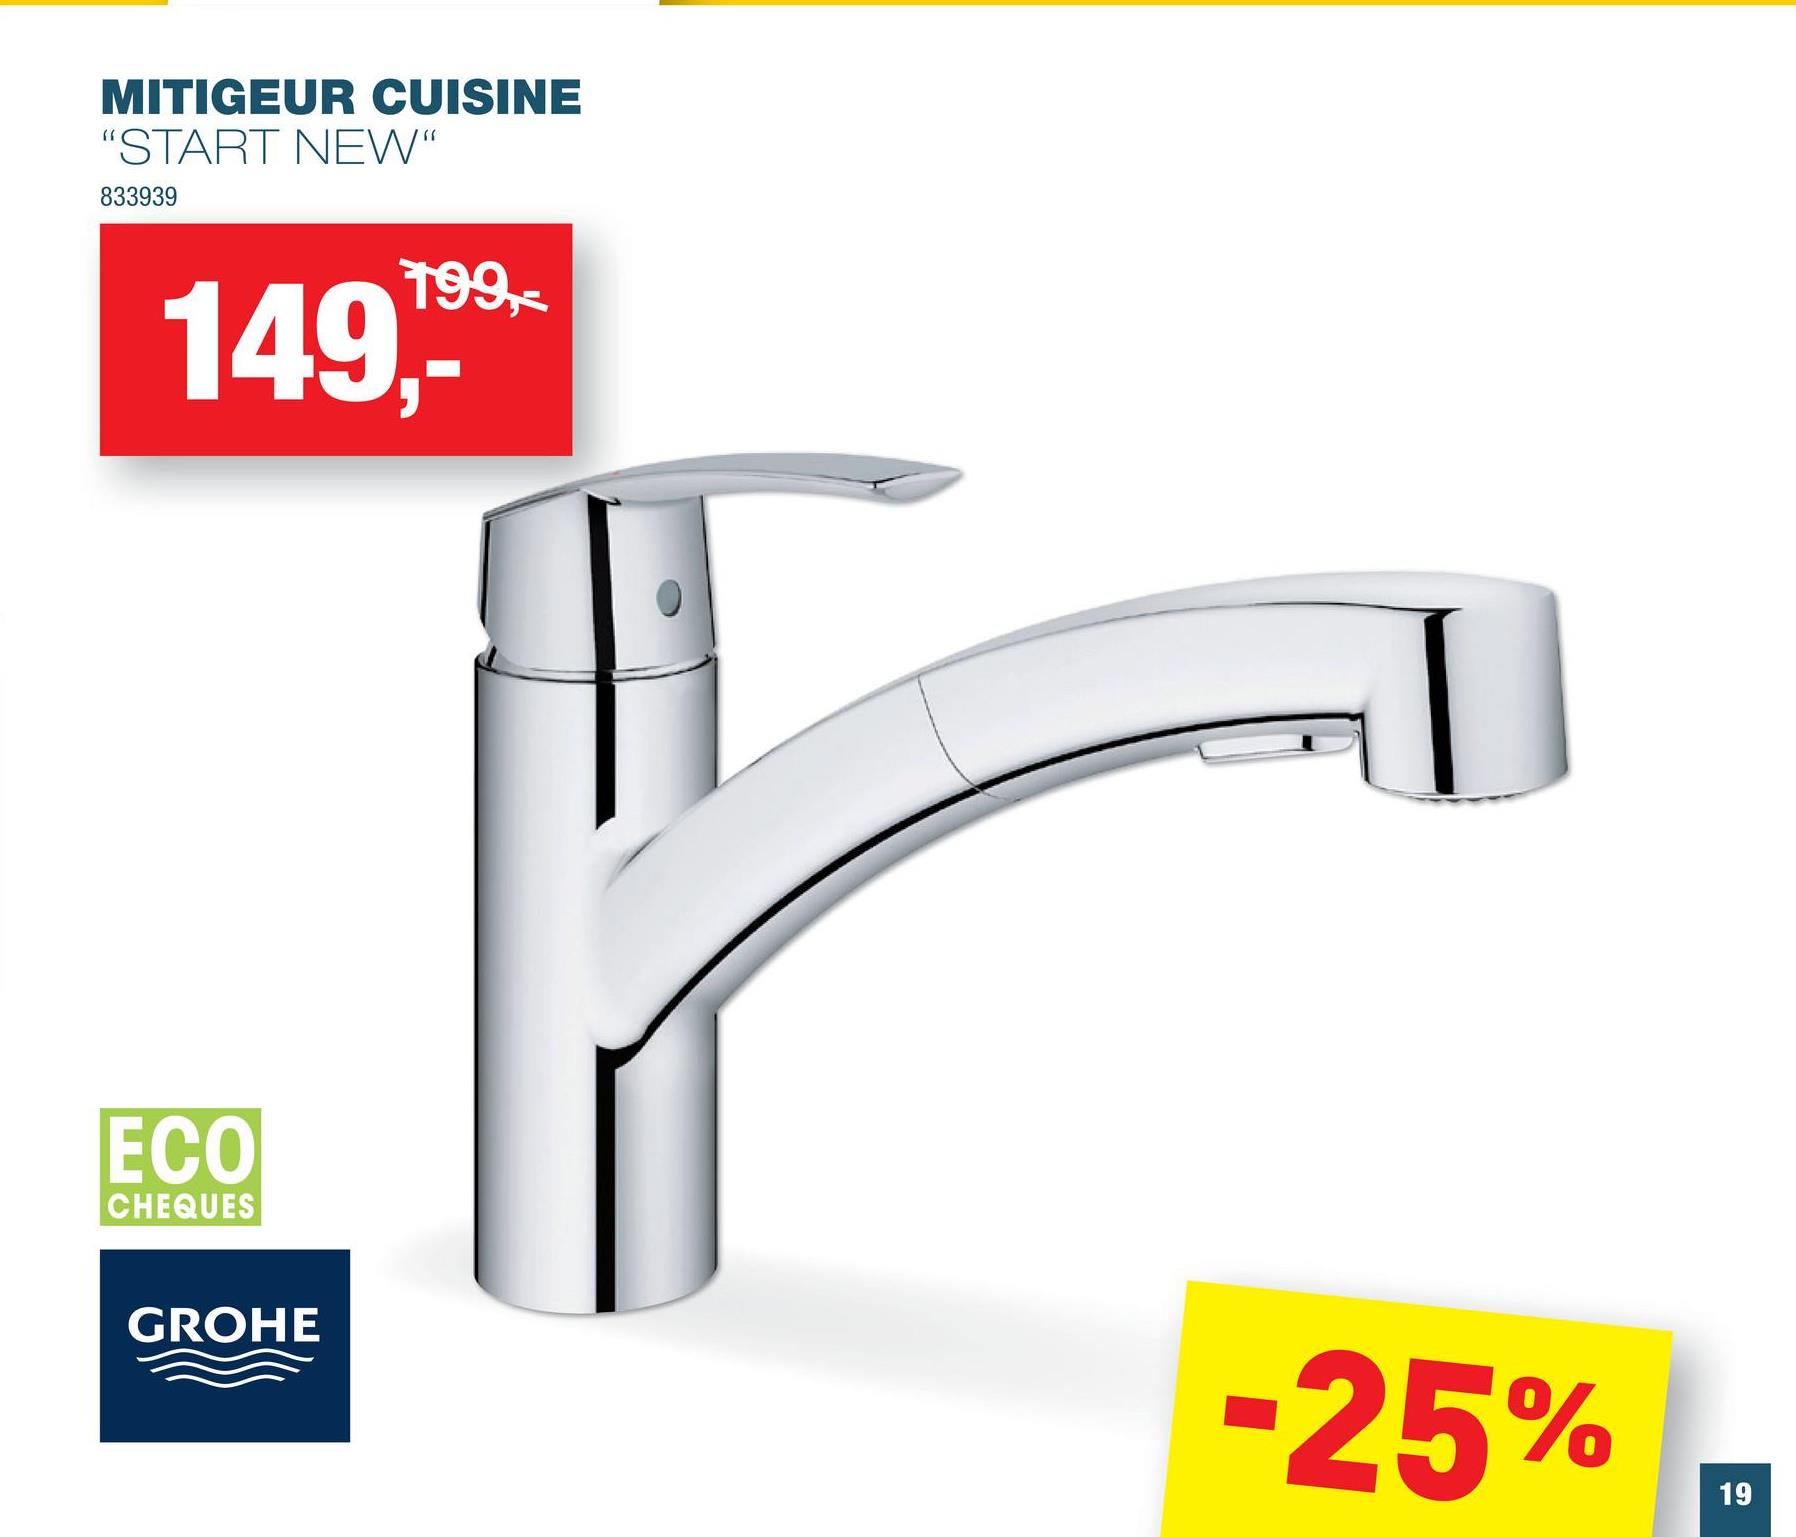 MITIGEUR CUISINE
"START NEW"
833939
149,-*
ECO
CHEQUES
199,-
GROHE
-25%
19